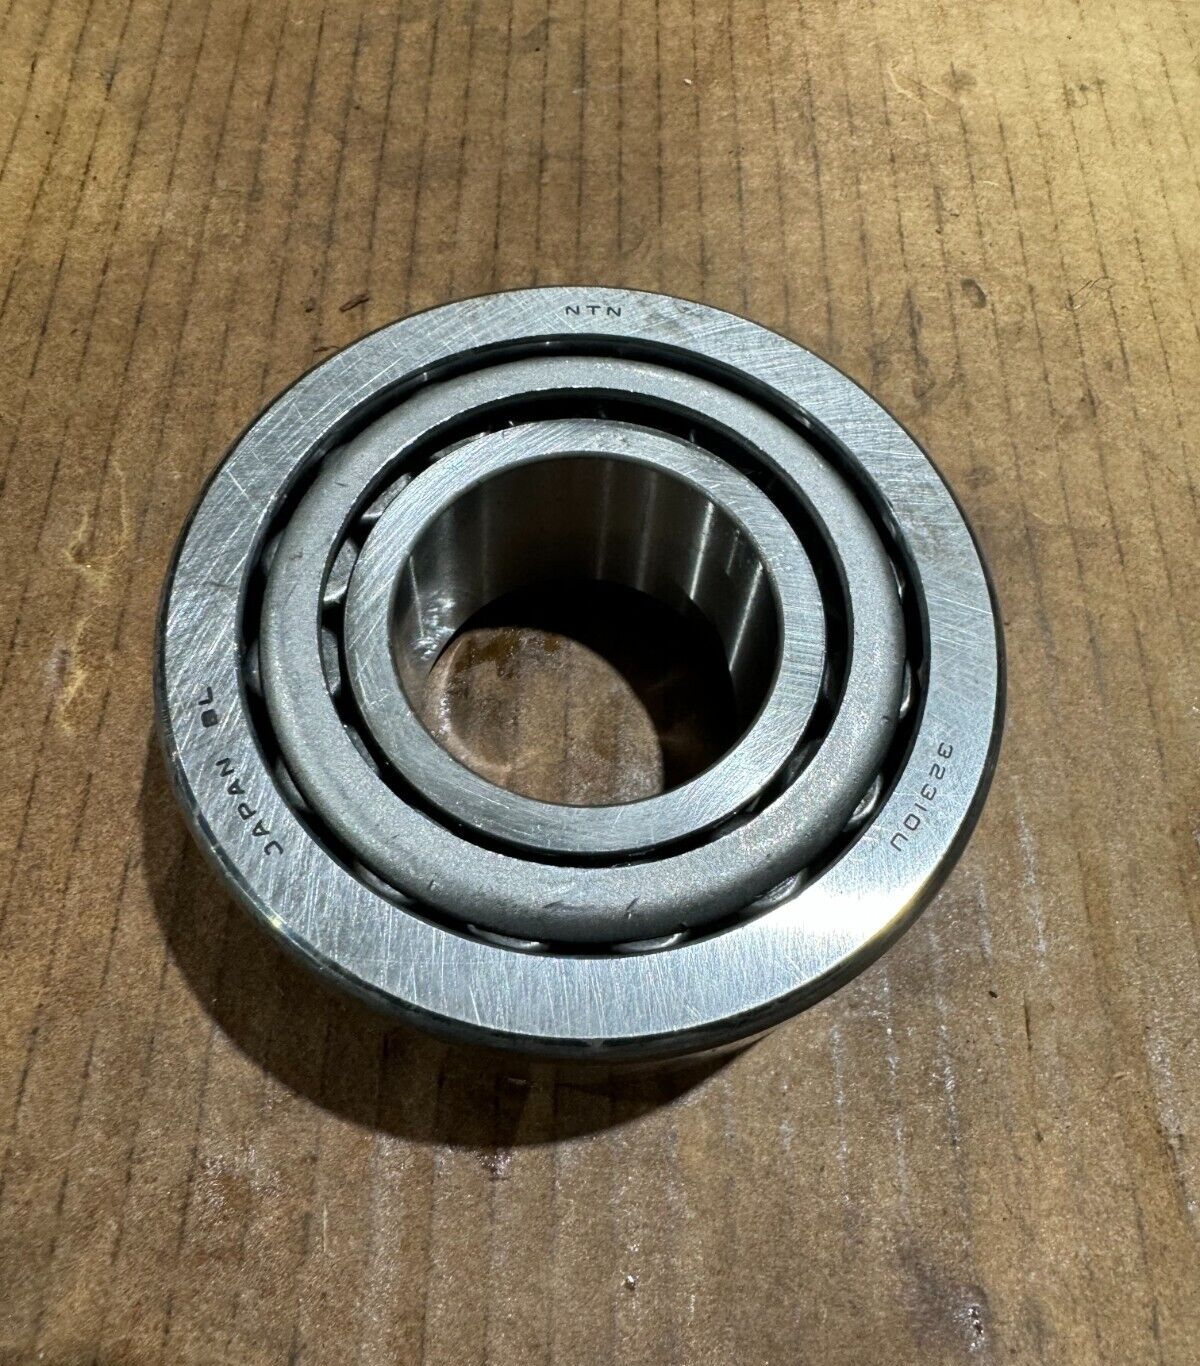 NEW NTN TAPERED ROLLER BEARING ASSEMBLY 32310U